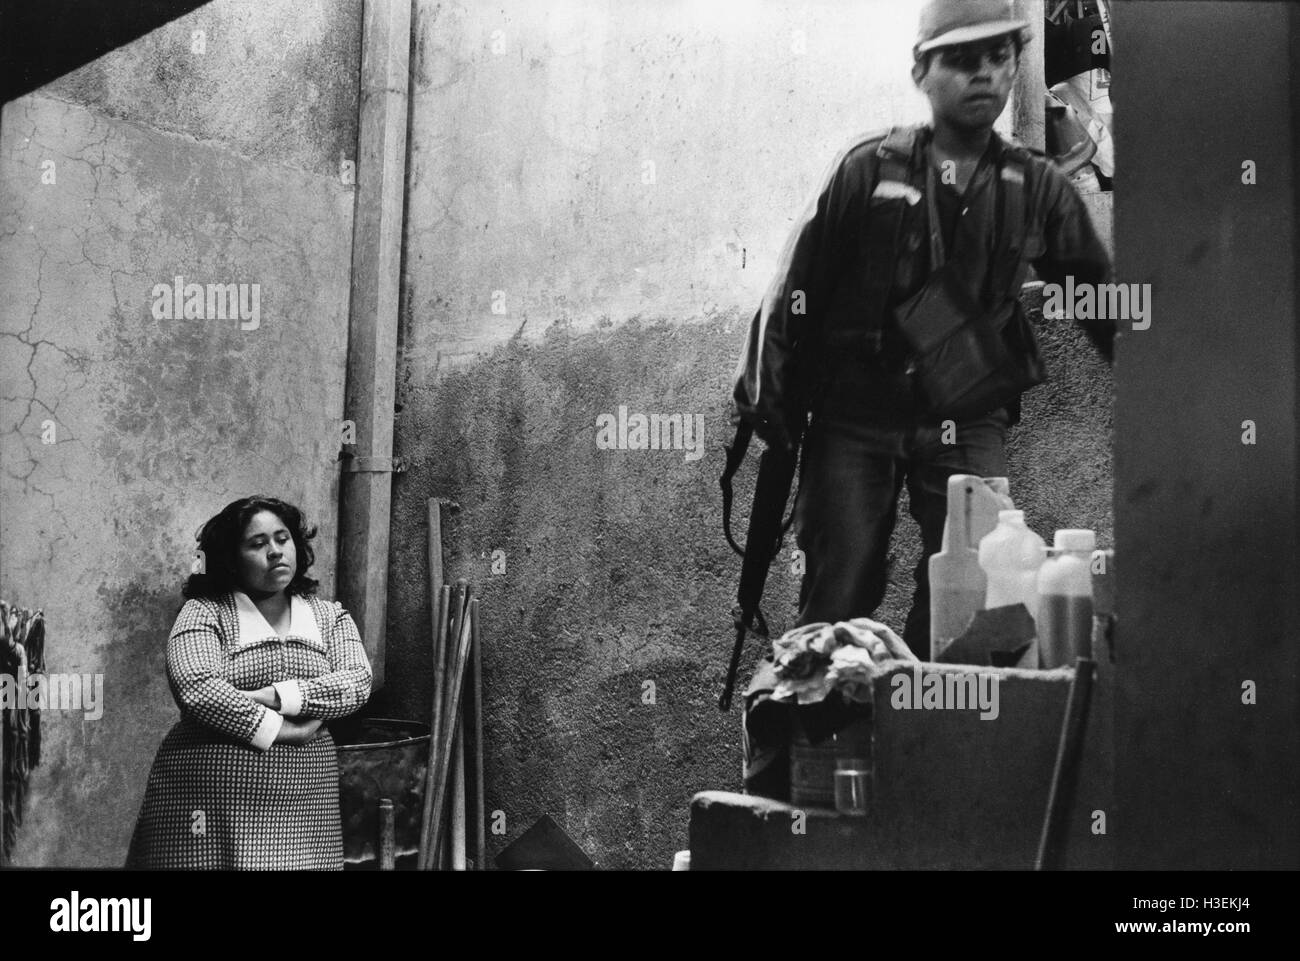 SAN SALVADOR, EL SALVADOR, March 1984: Salvadoran army conduct house-to-house searches in the capital. Stock Photo